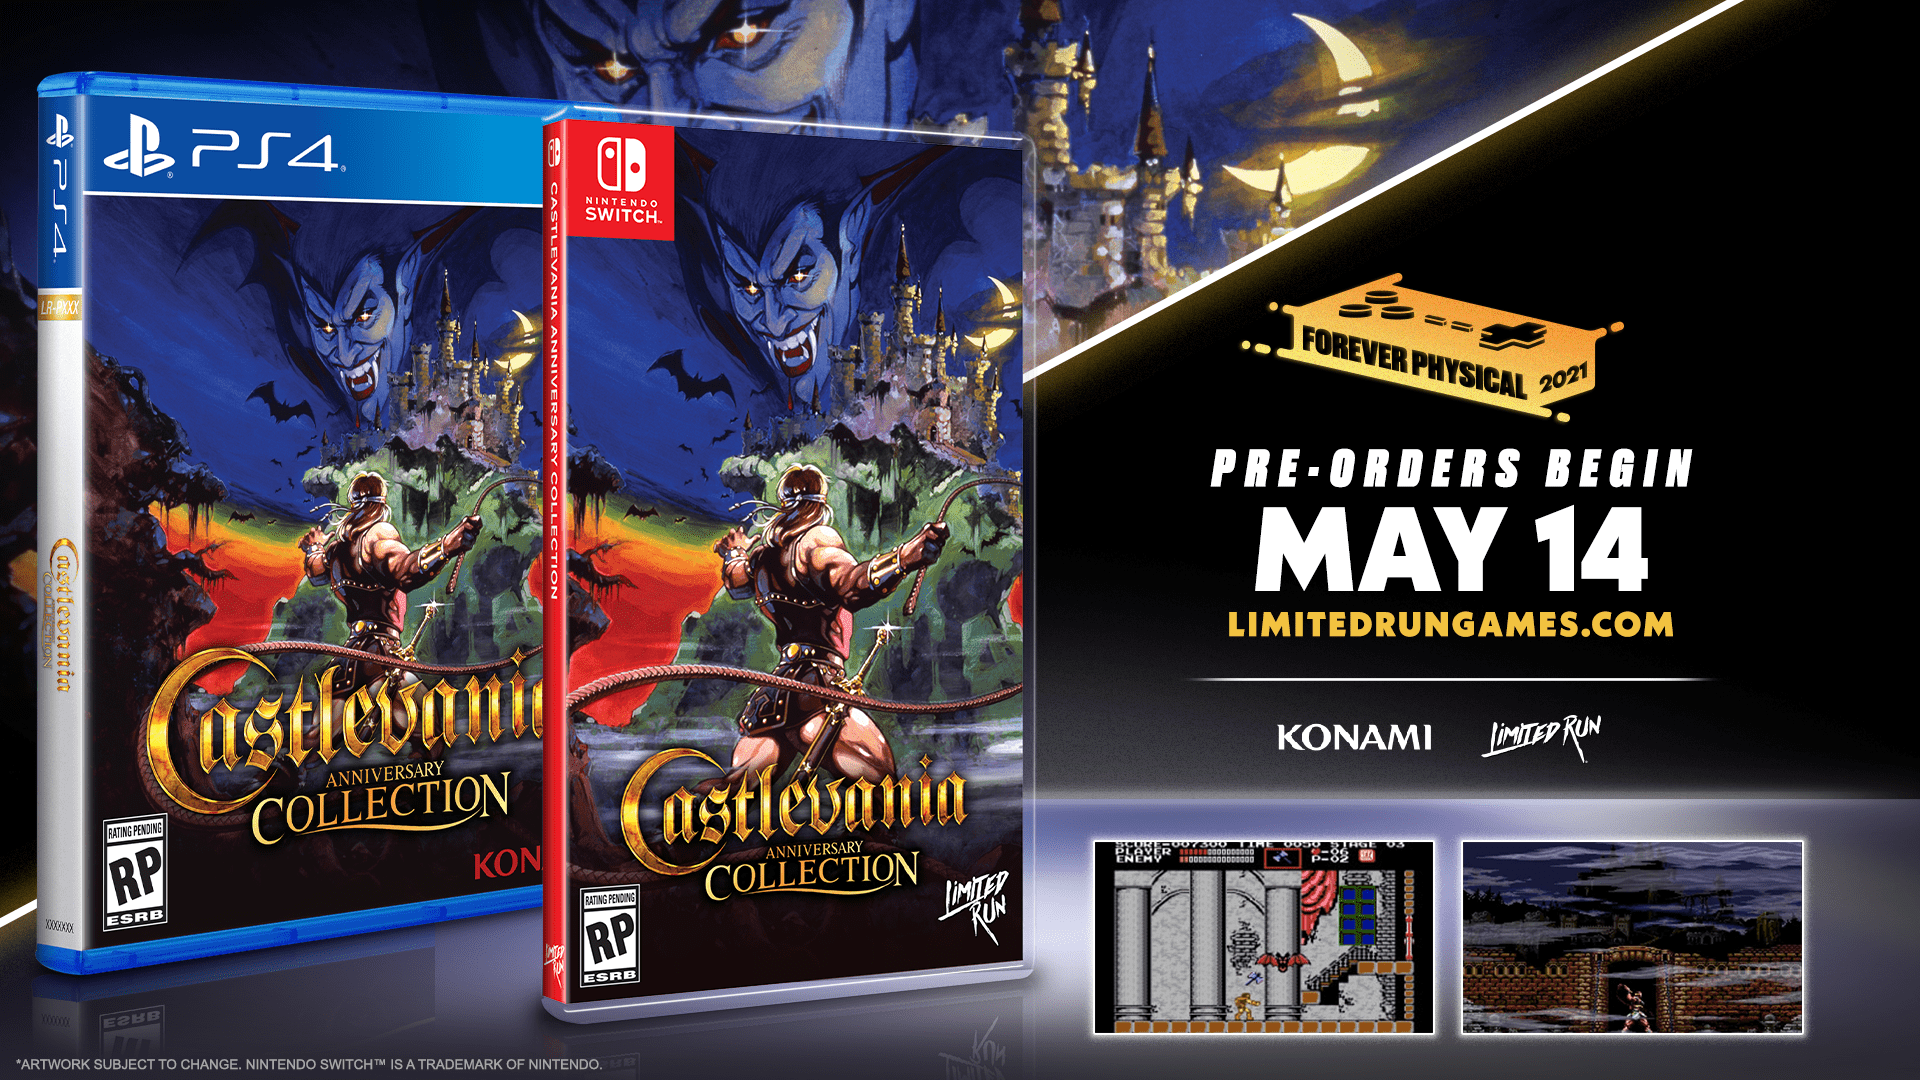 You are currently viewing The Castlevania Anniversary Collection Slays on Nintendo Switch & PlayStation 4 With Four Physical Editions! Pre-Orders start May 14.